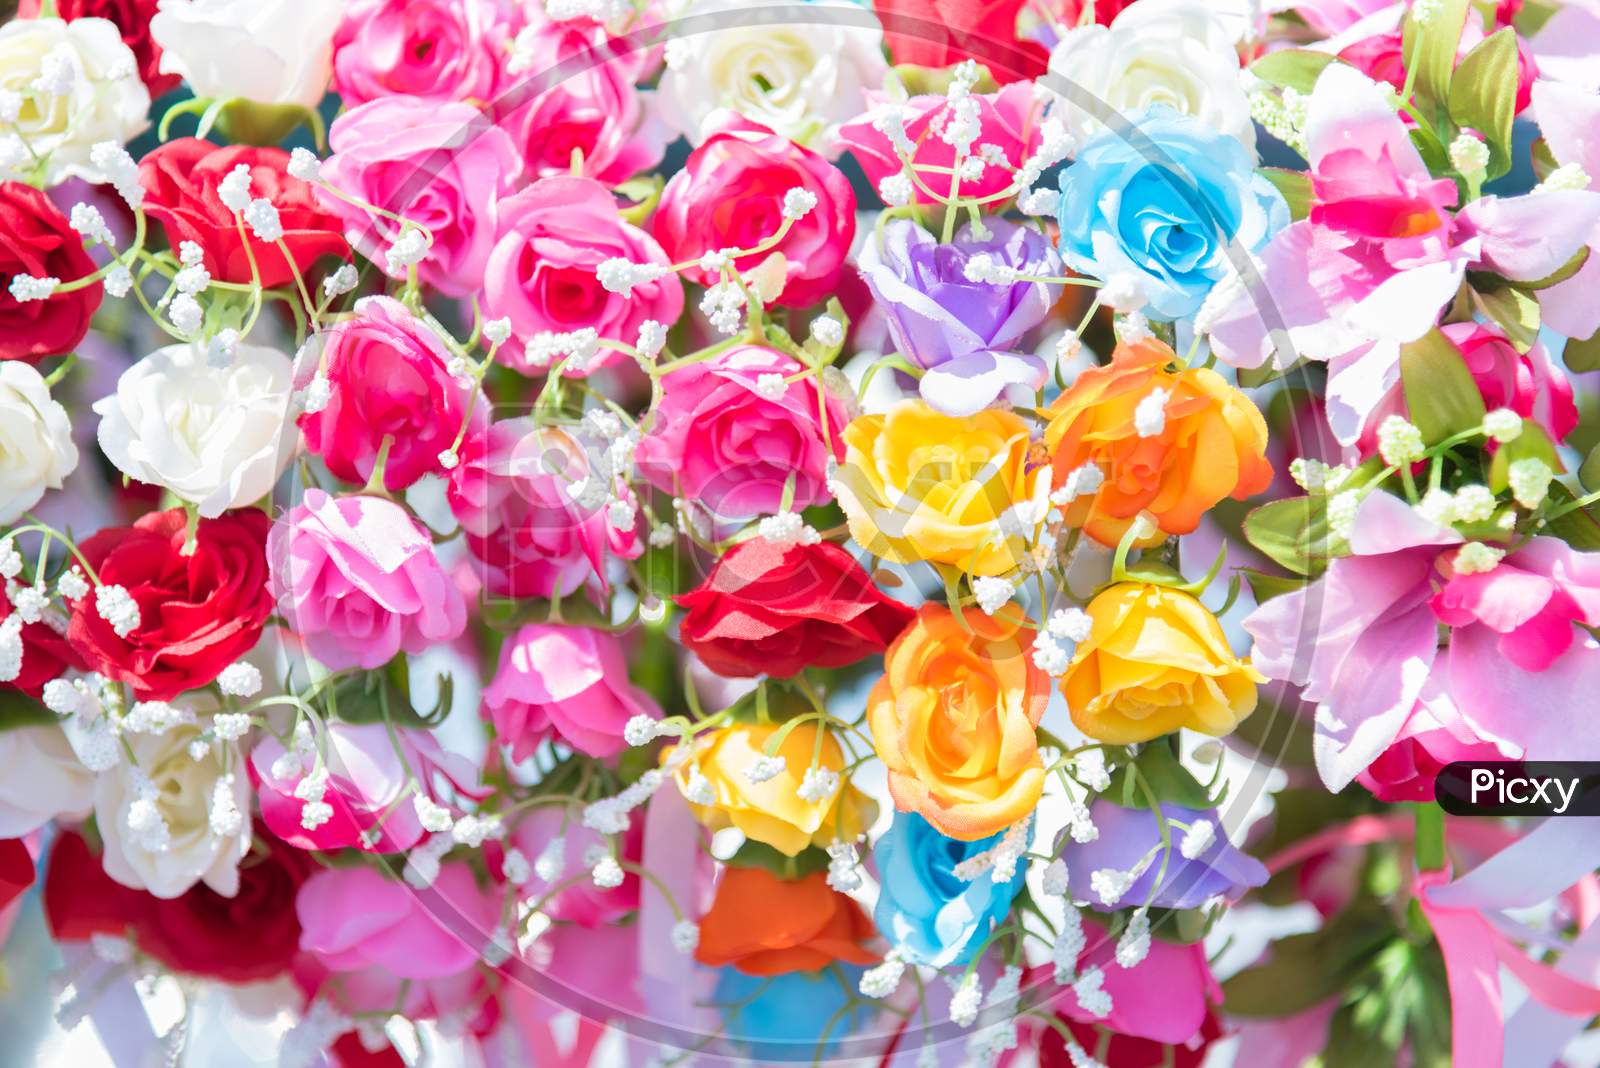 Beautiful Bunch Of Flowers. Colorful Flowers For Wedding And Congratulation Events. Flowers Of Greeting And Graduated Concept